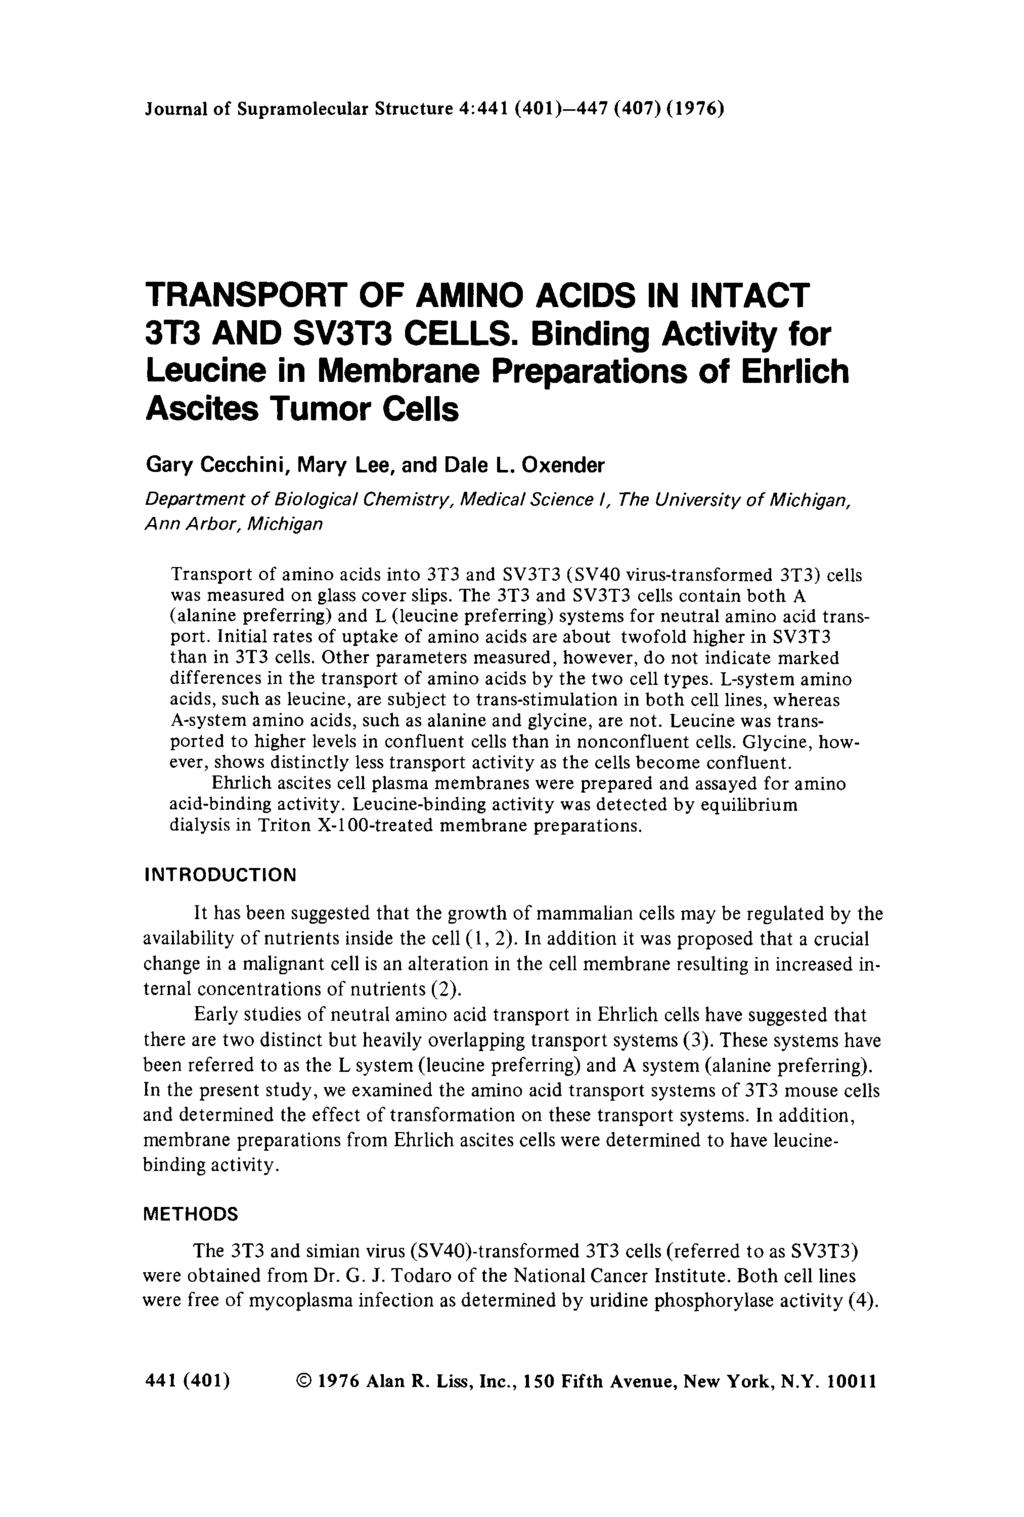 Journal of Supramolecular Structure 4:441 (401)-447 (407) (1976) TRANSPORT OF AMINO ACIDS IN INTACT 3T3 AND SV3T3 CELLS.